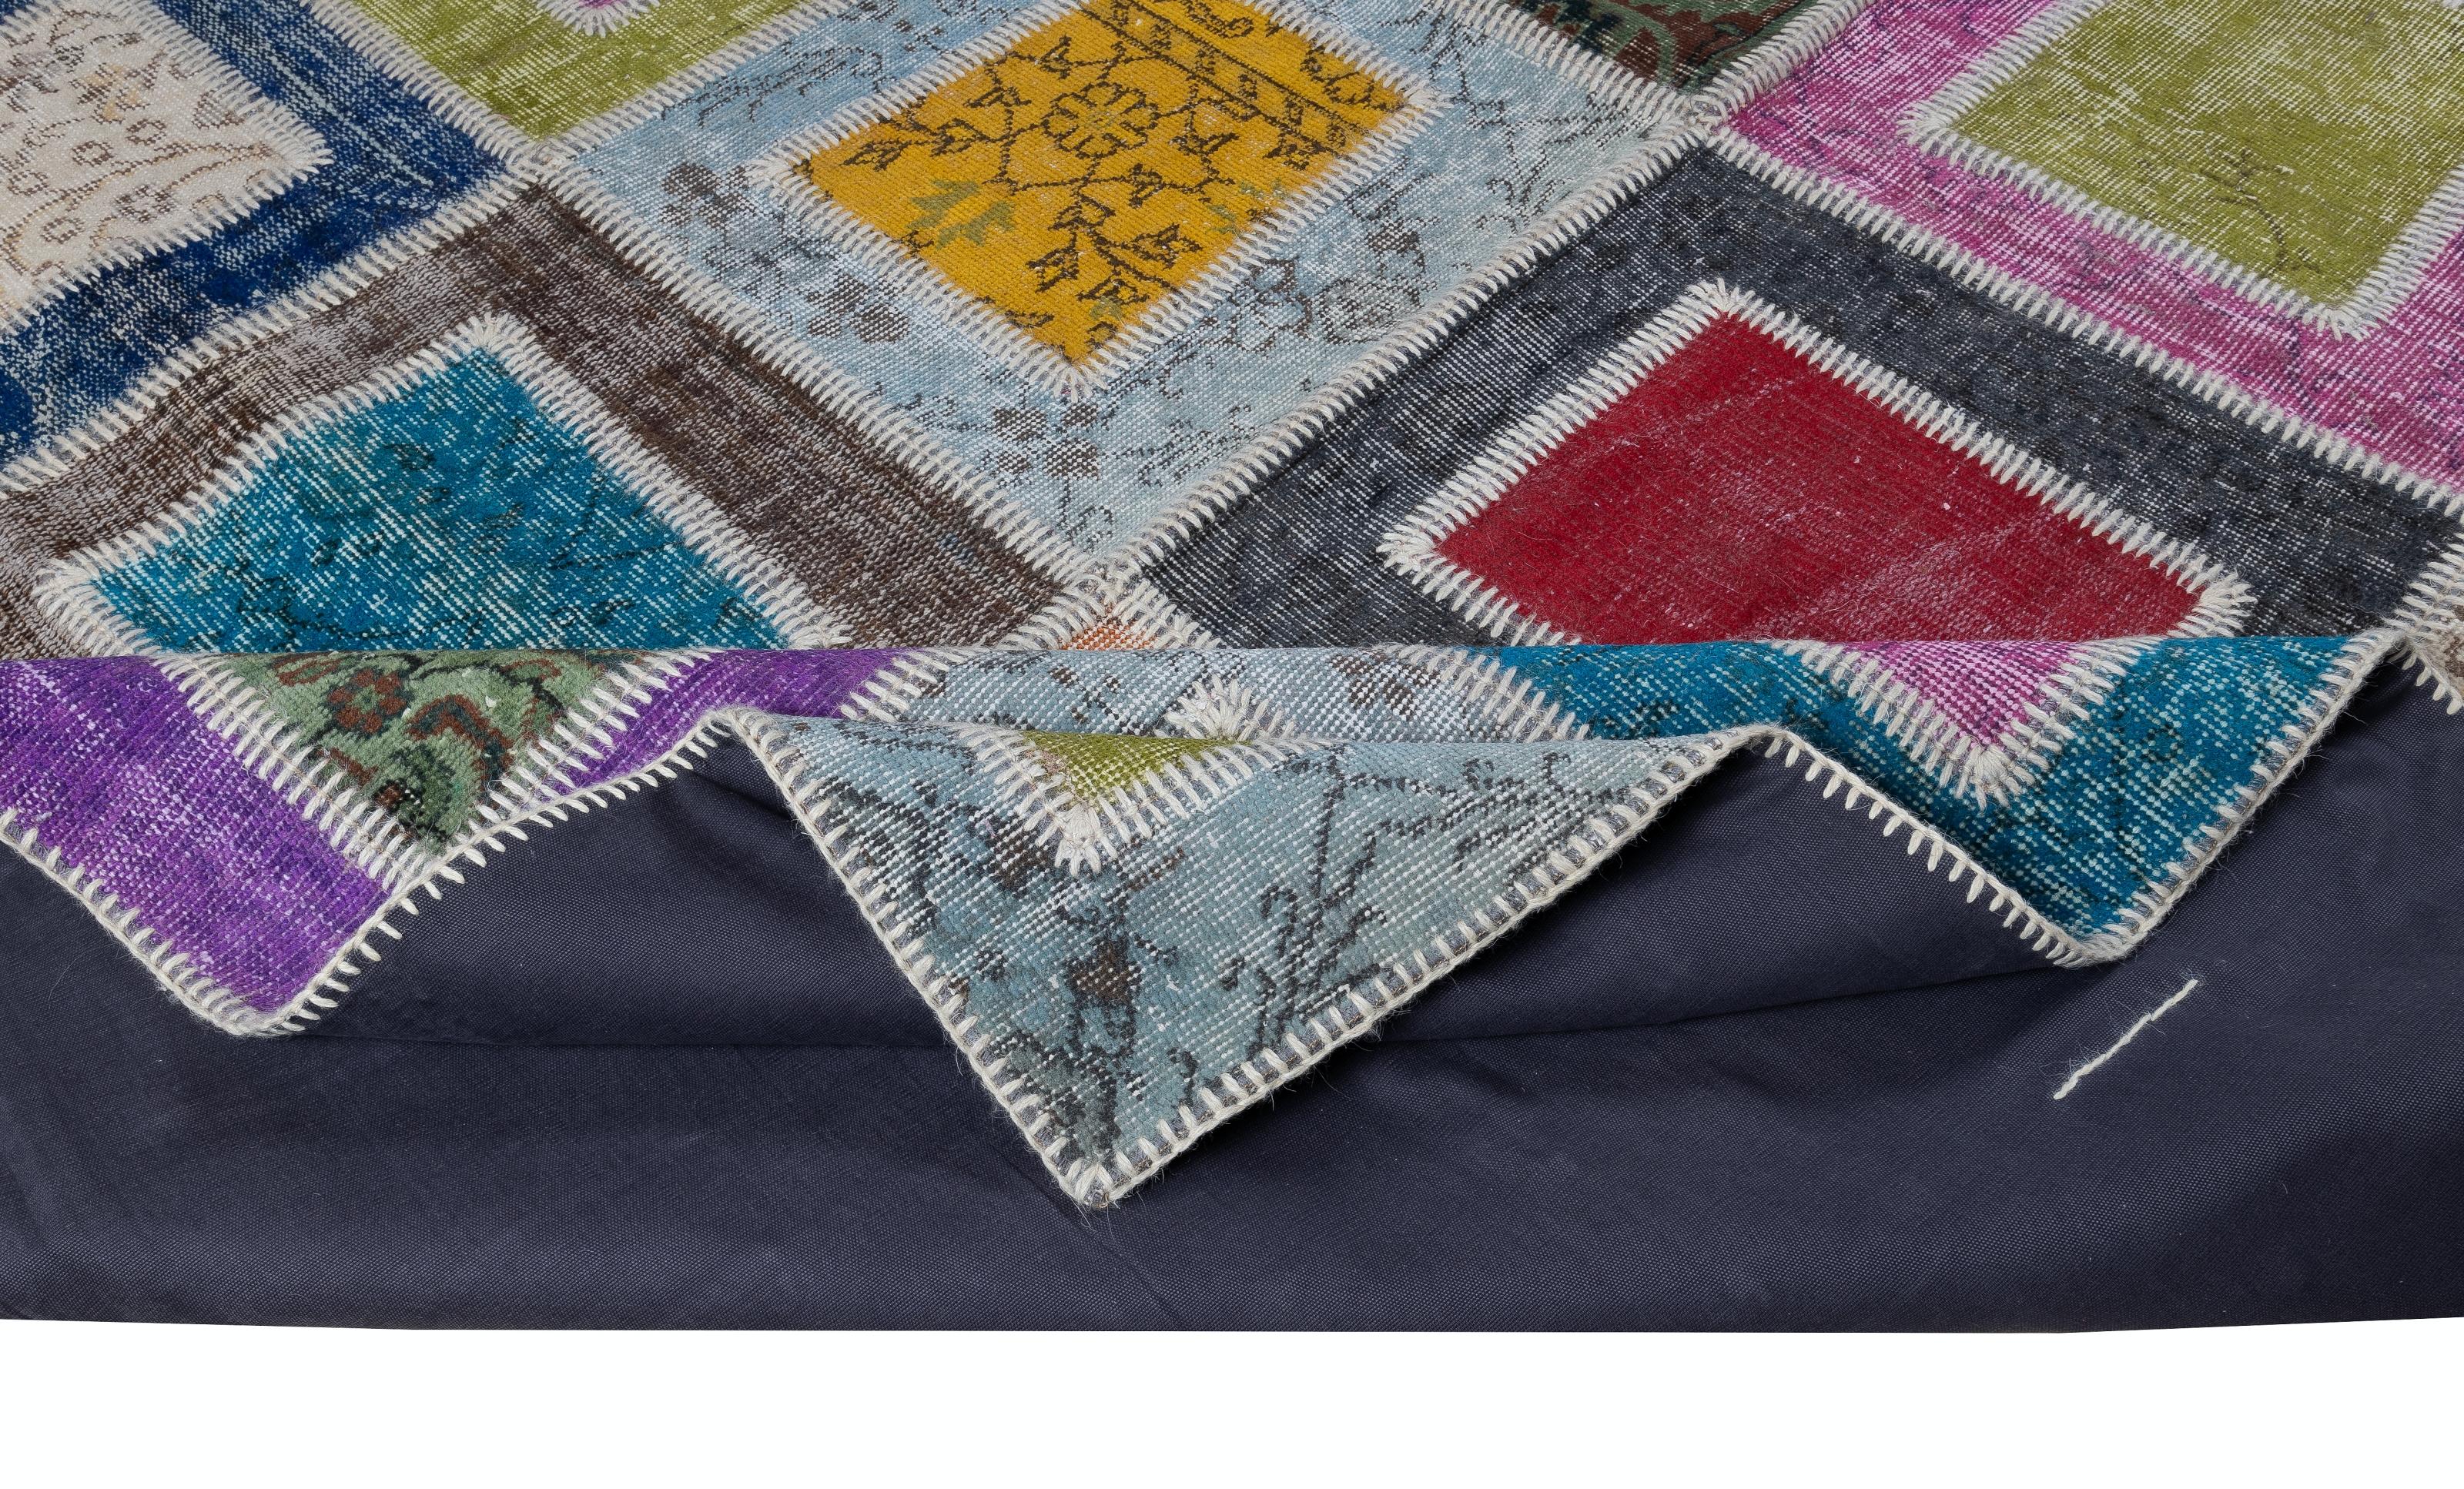 Assorted pieces of vintage hand-knotted Turkish carpets were washed, sheared, re-dyed in various colors, cut into geometric shapes then stitched together by hand to create this beautiful one of a kind patchwork rug. 
A durable dark color cotton